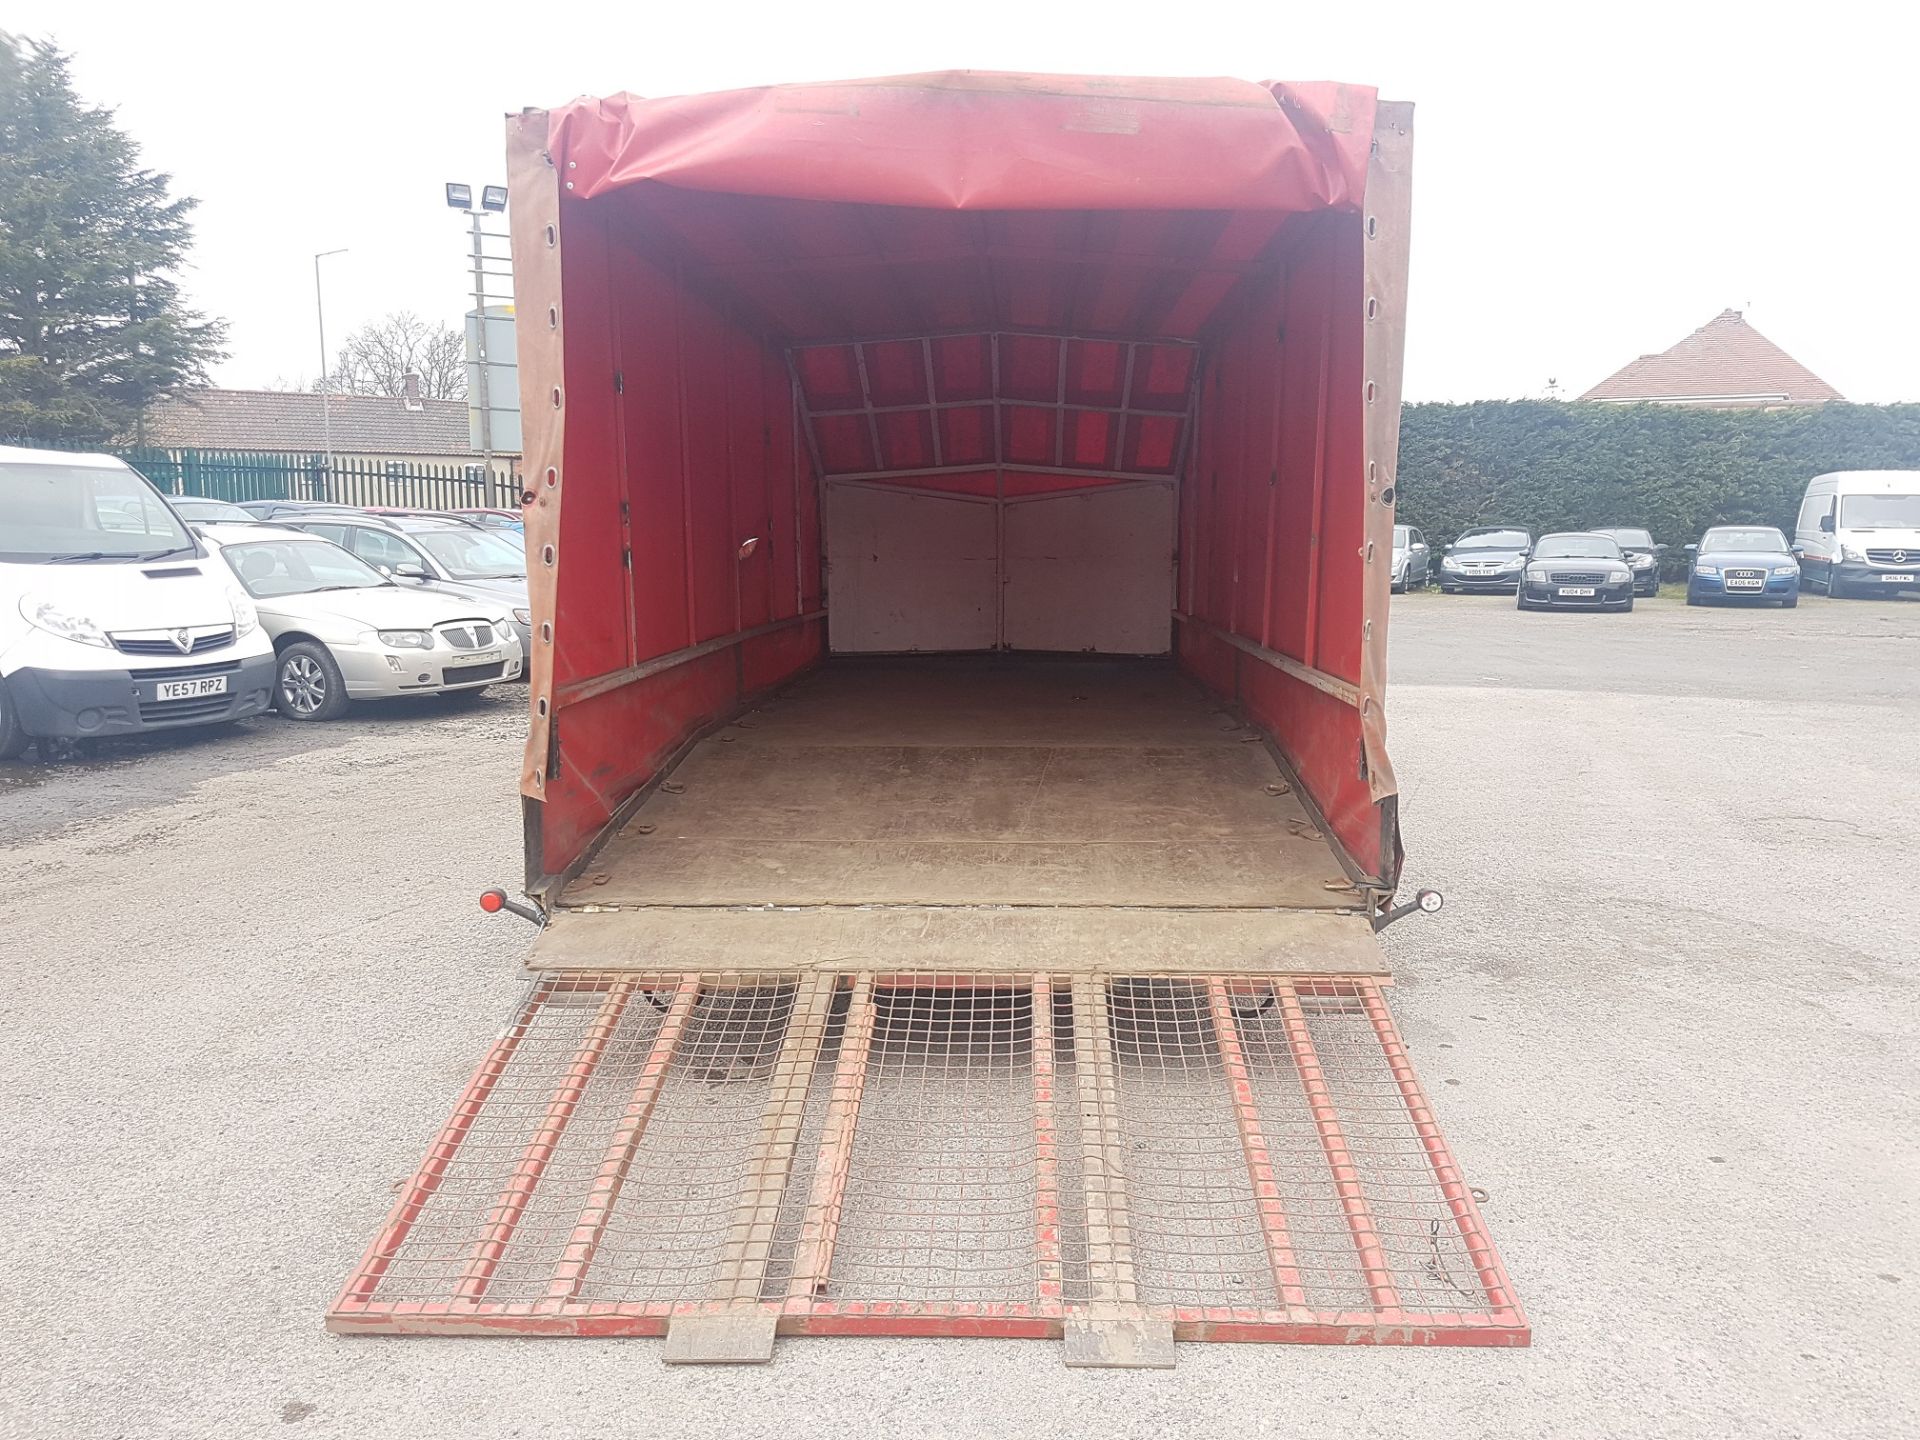 TRI-AXLE BEAVER-TAIL CAR TRANSPORTER COVERED TRAILER *PLUS VAT*   NEW AXLE SPRINGS, BRAKES AND LED - Image 9 of 13